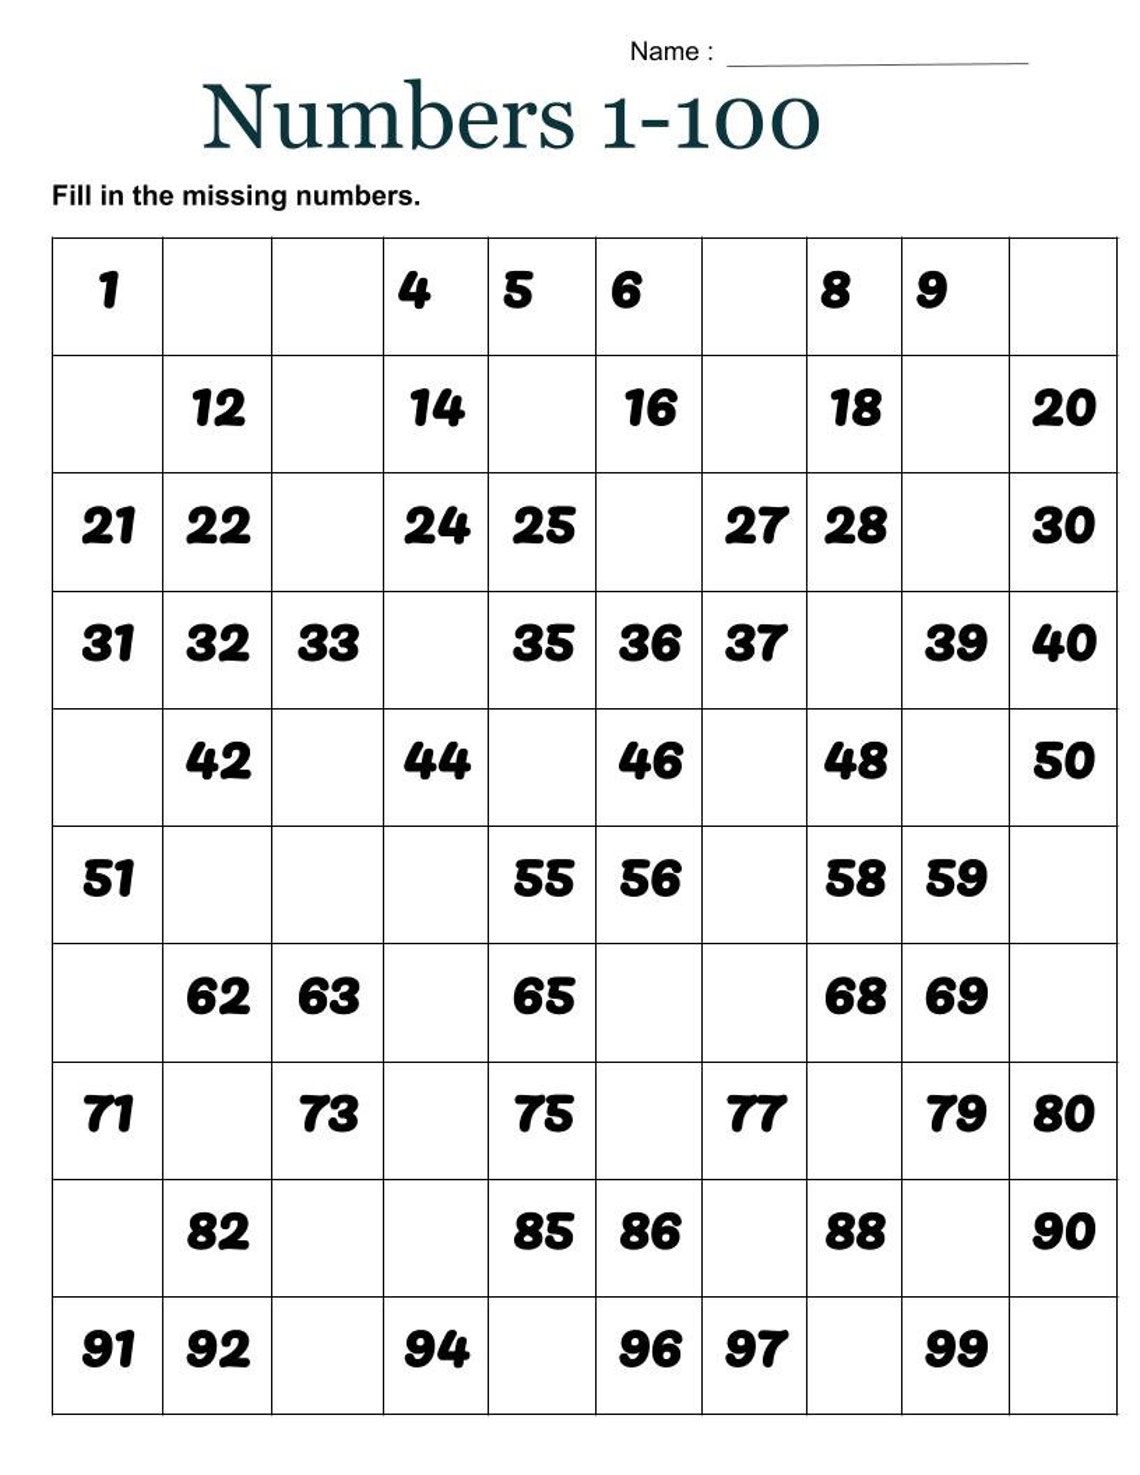 amazing-printable-worksheet-for-kids-about-to-write-each-missing-number-1-100-worksheet-bee